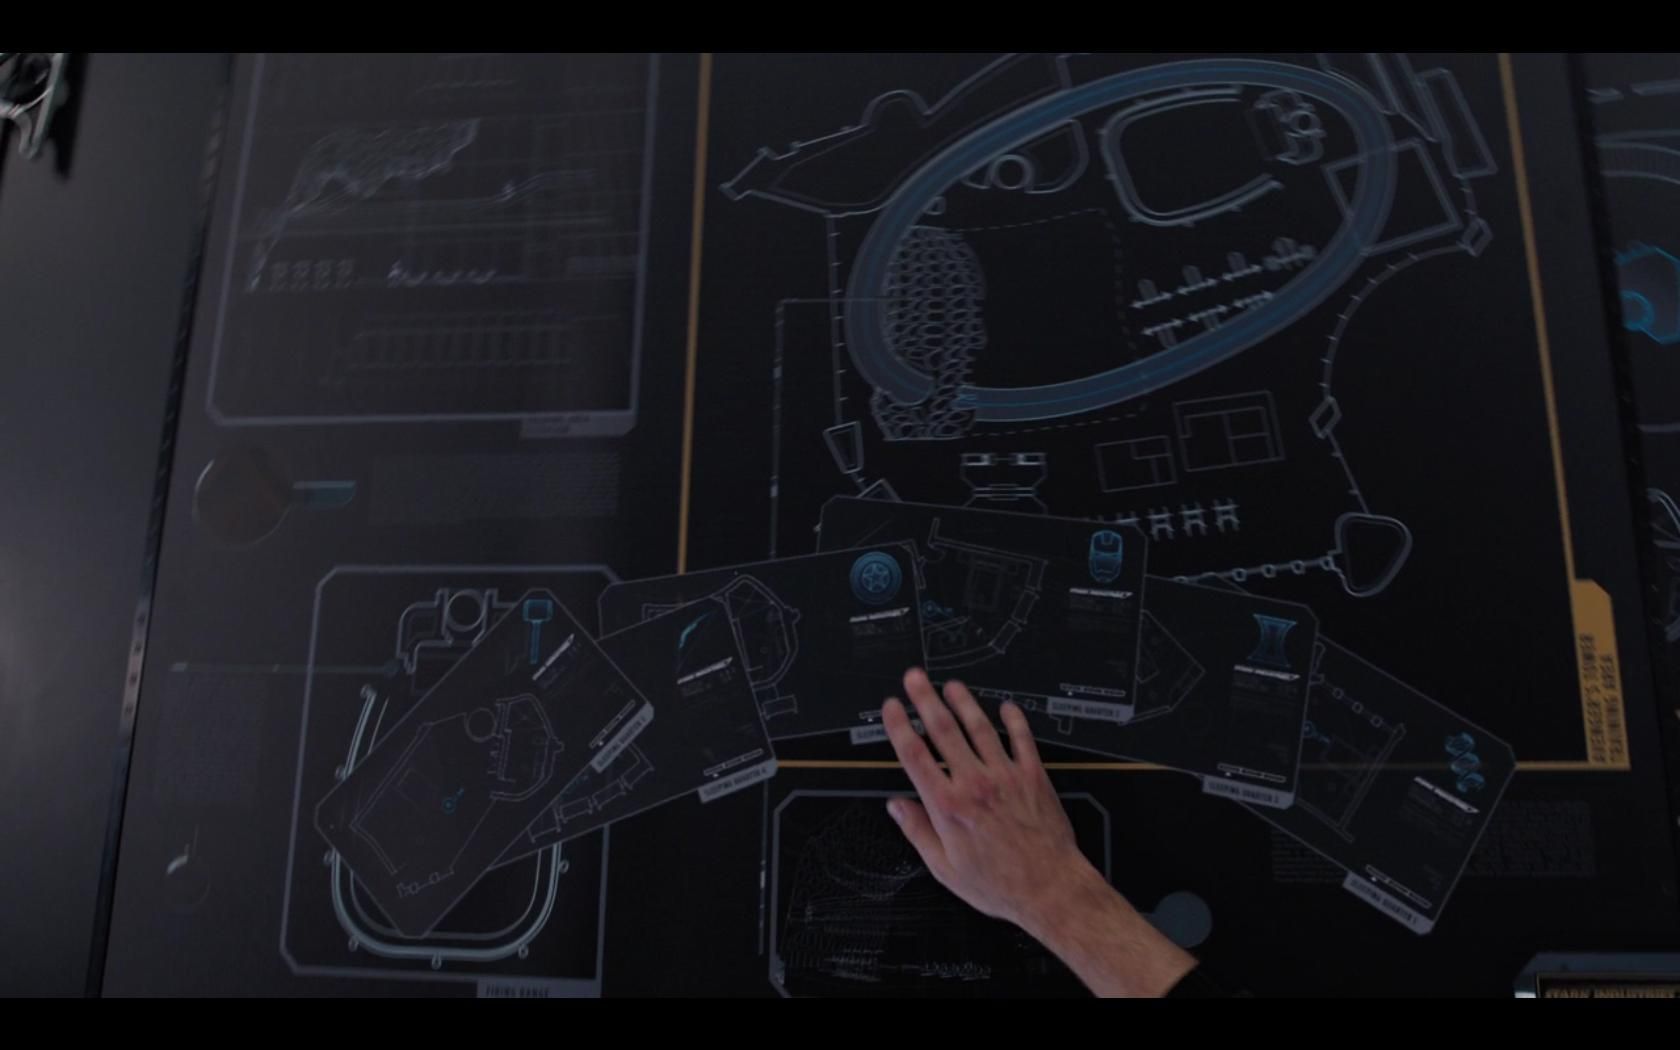 What Building Is Tony Stark Working On At The End Of 'The Avengers